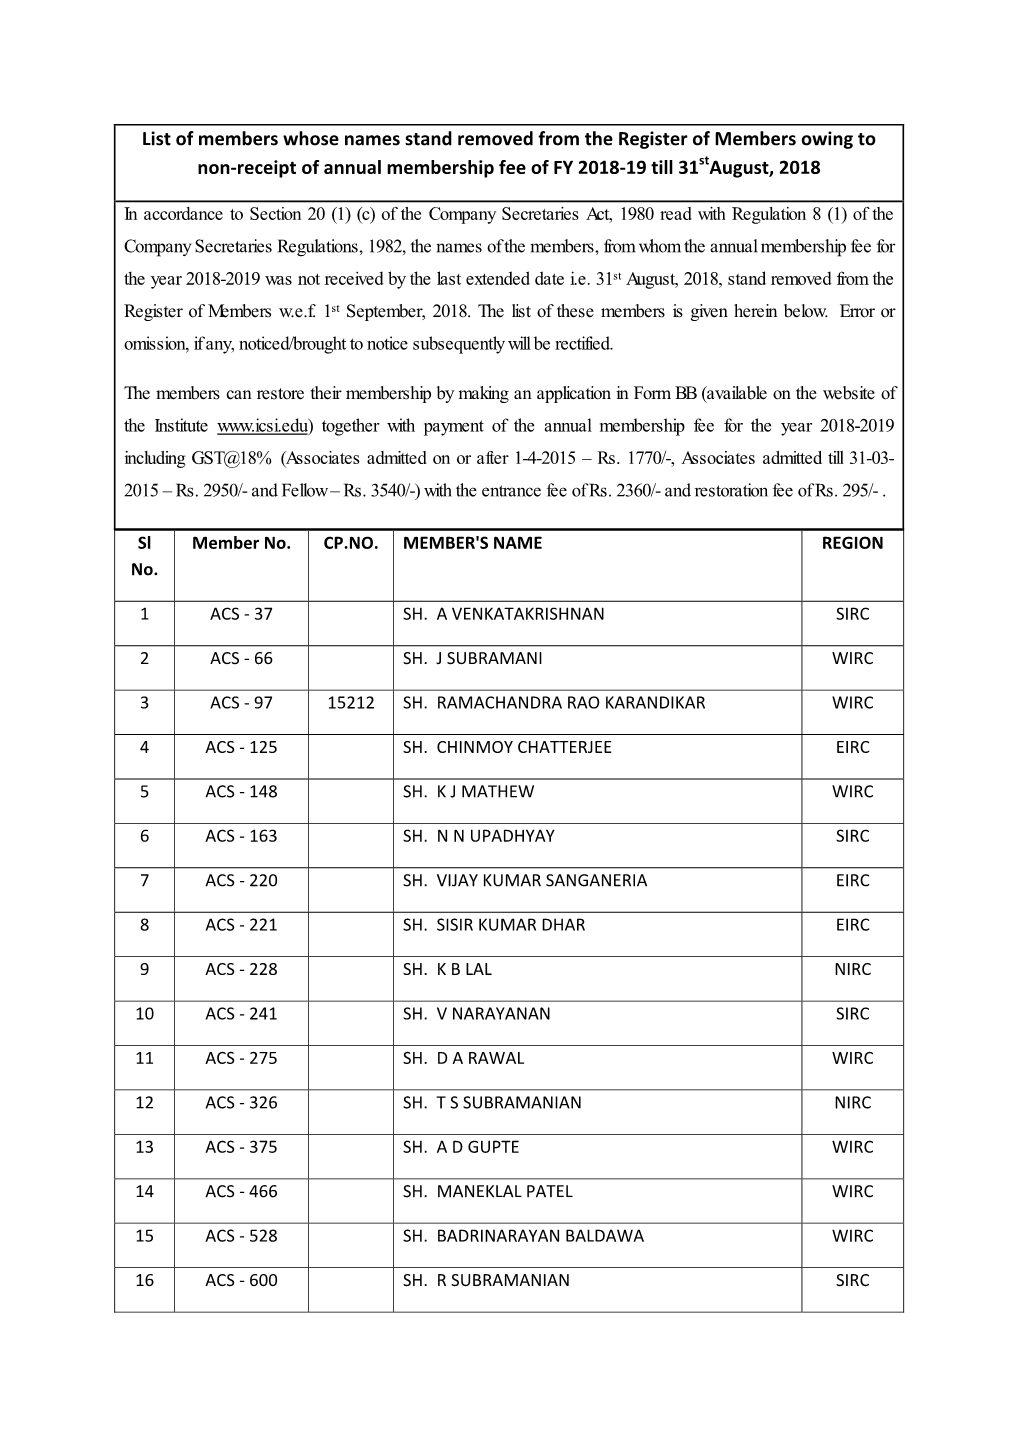 List of Members Whose Names Stand Removed from the Register of Members Owing to Non‐Receipt of Annual Membership Fee of FY 2018‐19 Till 31Staugust, 2018